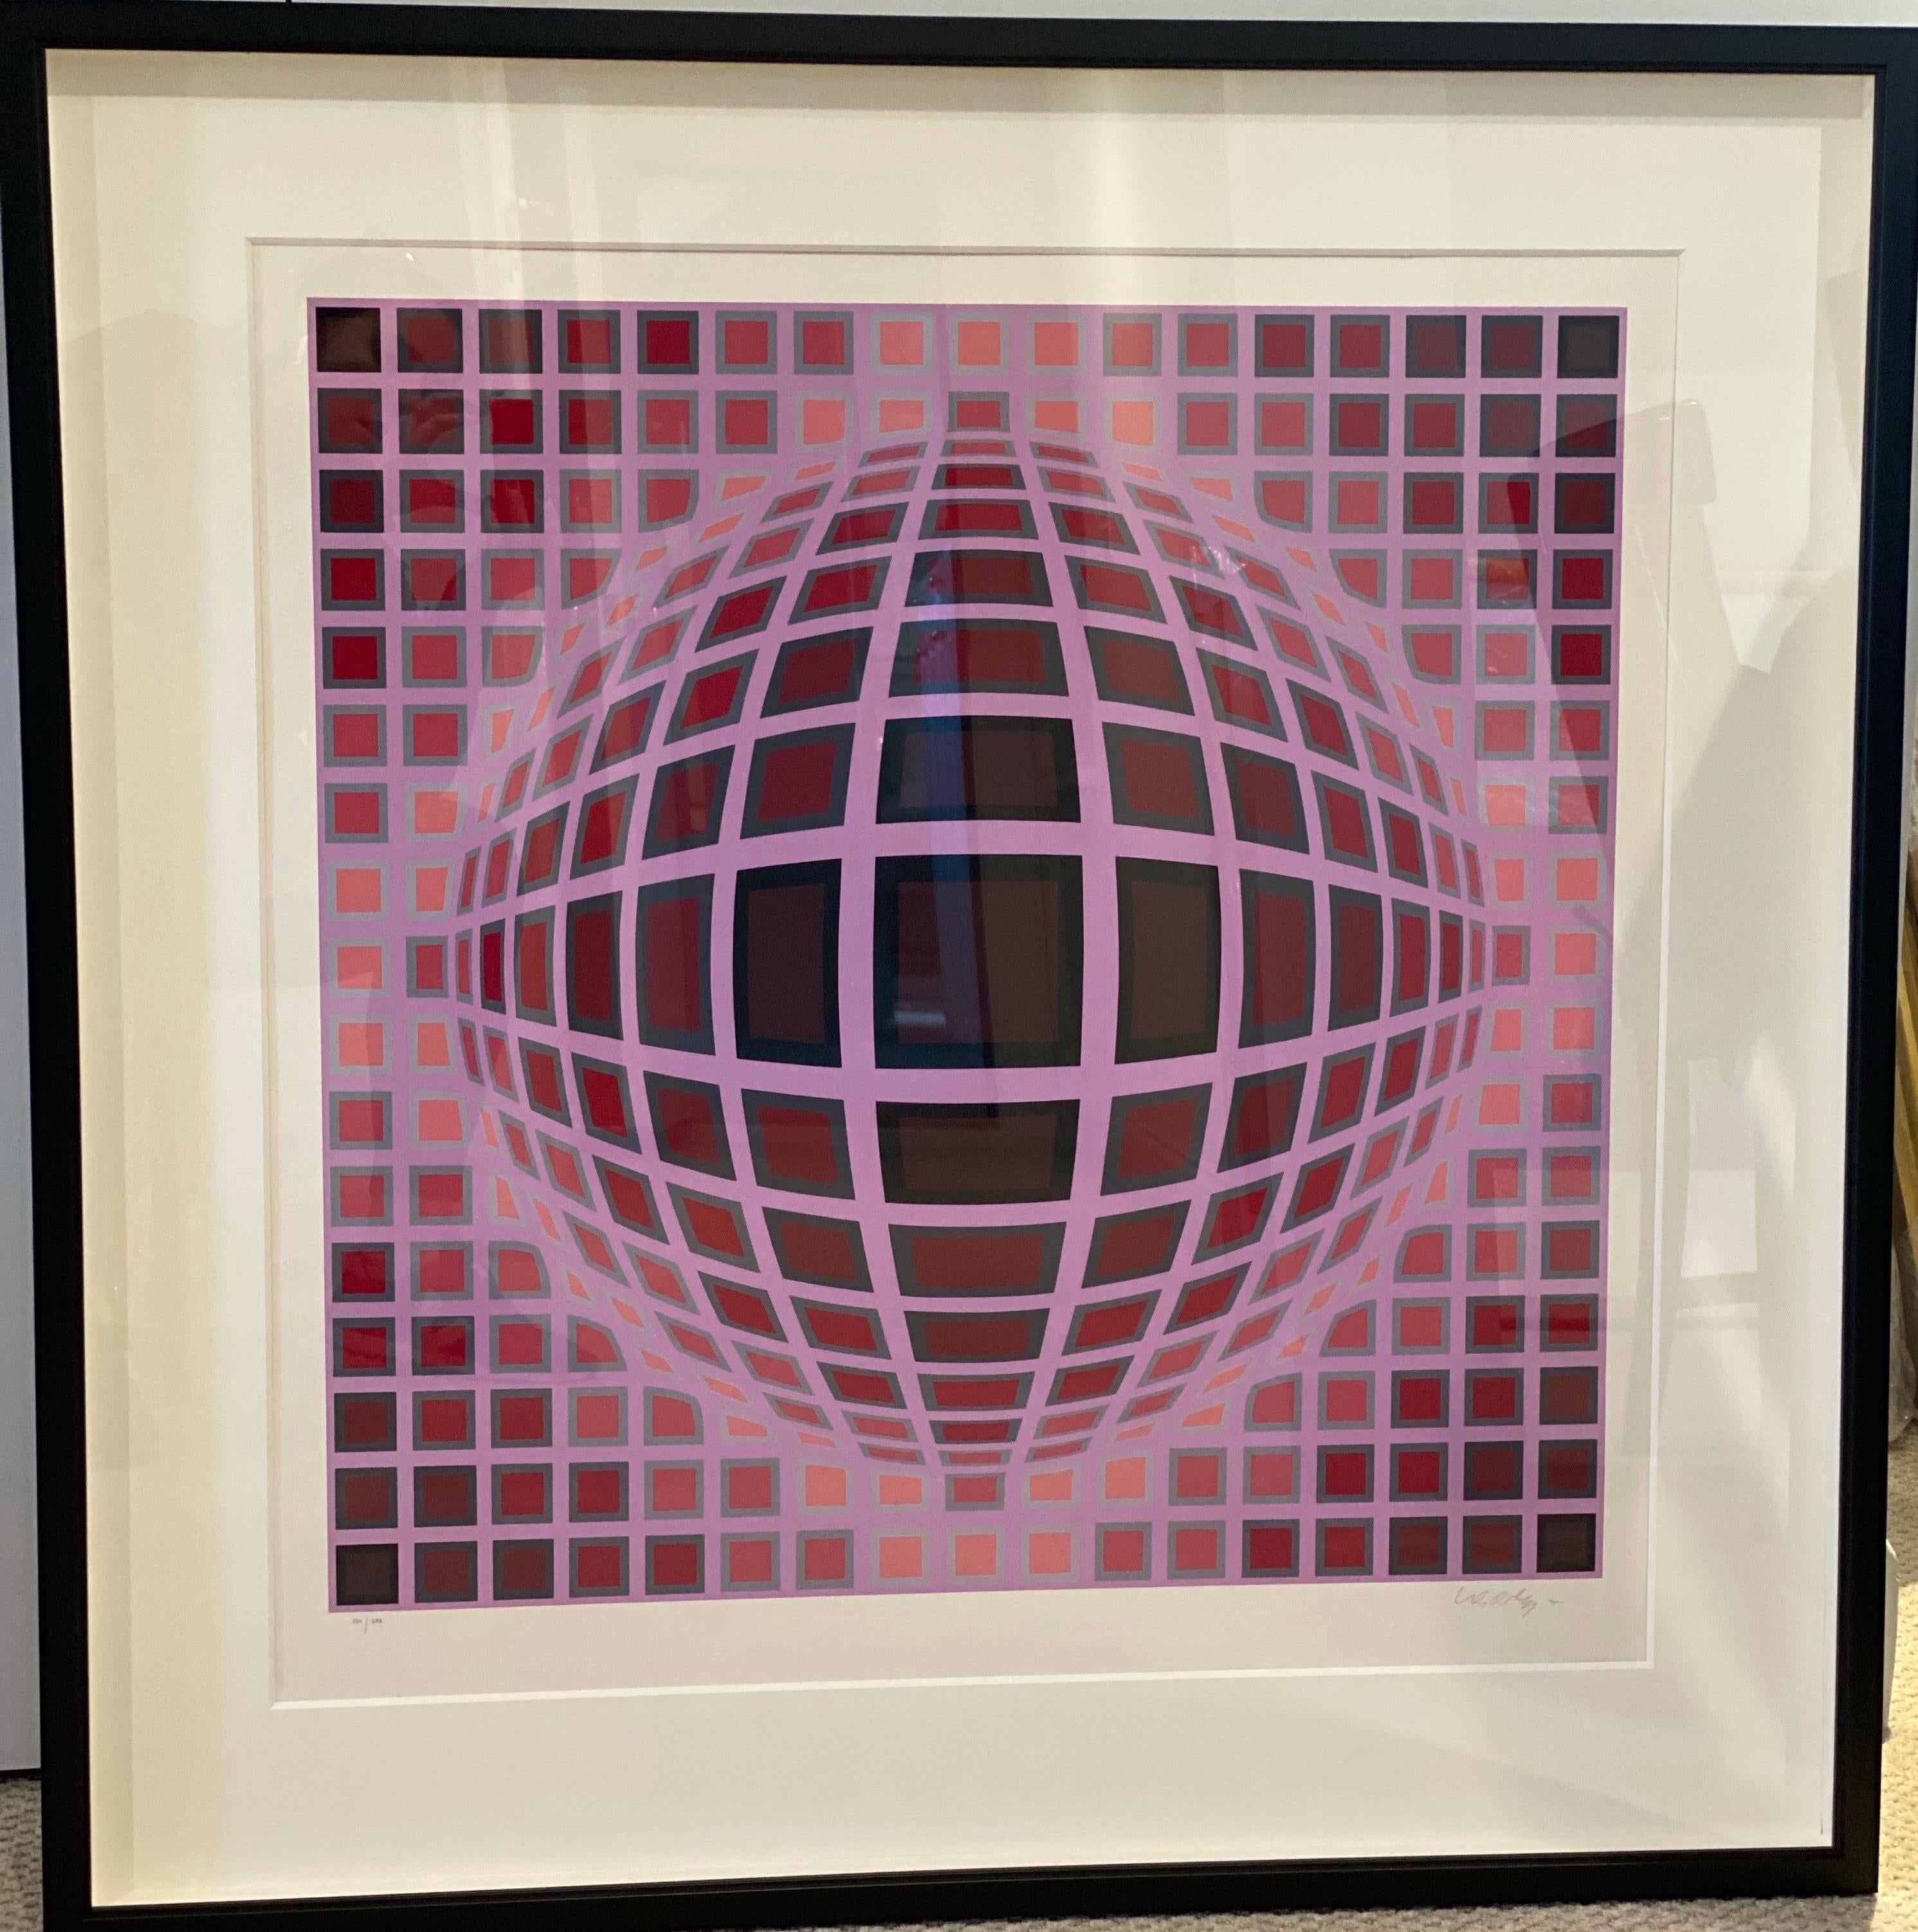 "Composition" by Victor Vasarely